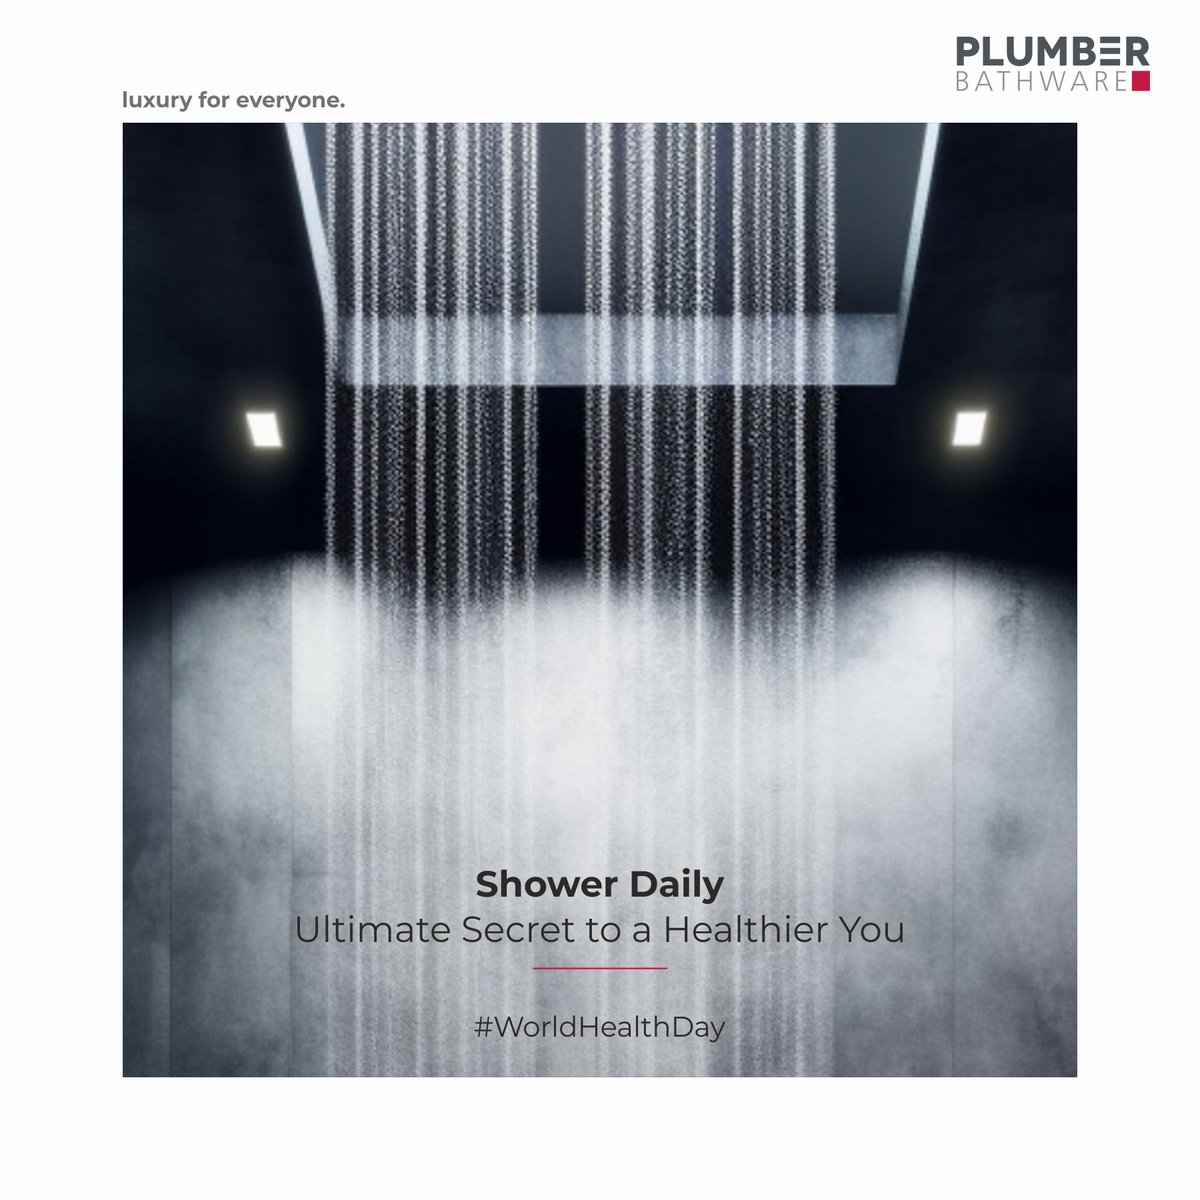 On World Health Day, let's commit to shower daily! 

#PlumberBathware #LuxuryForEveryone #WorldHealthDay #Healthy #Health #ModernBathrooms #LuxuryBathroom #Hygiene